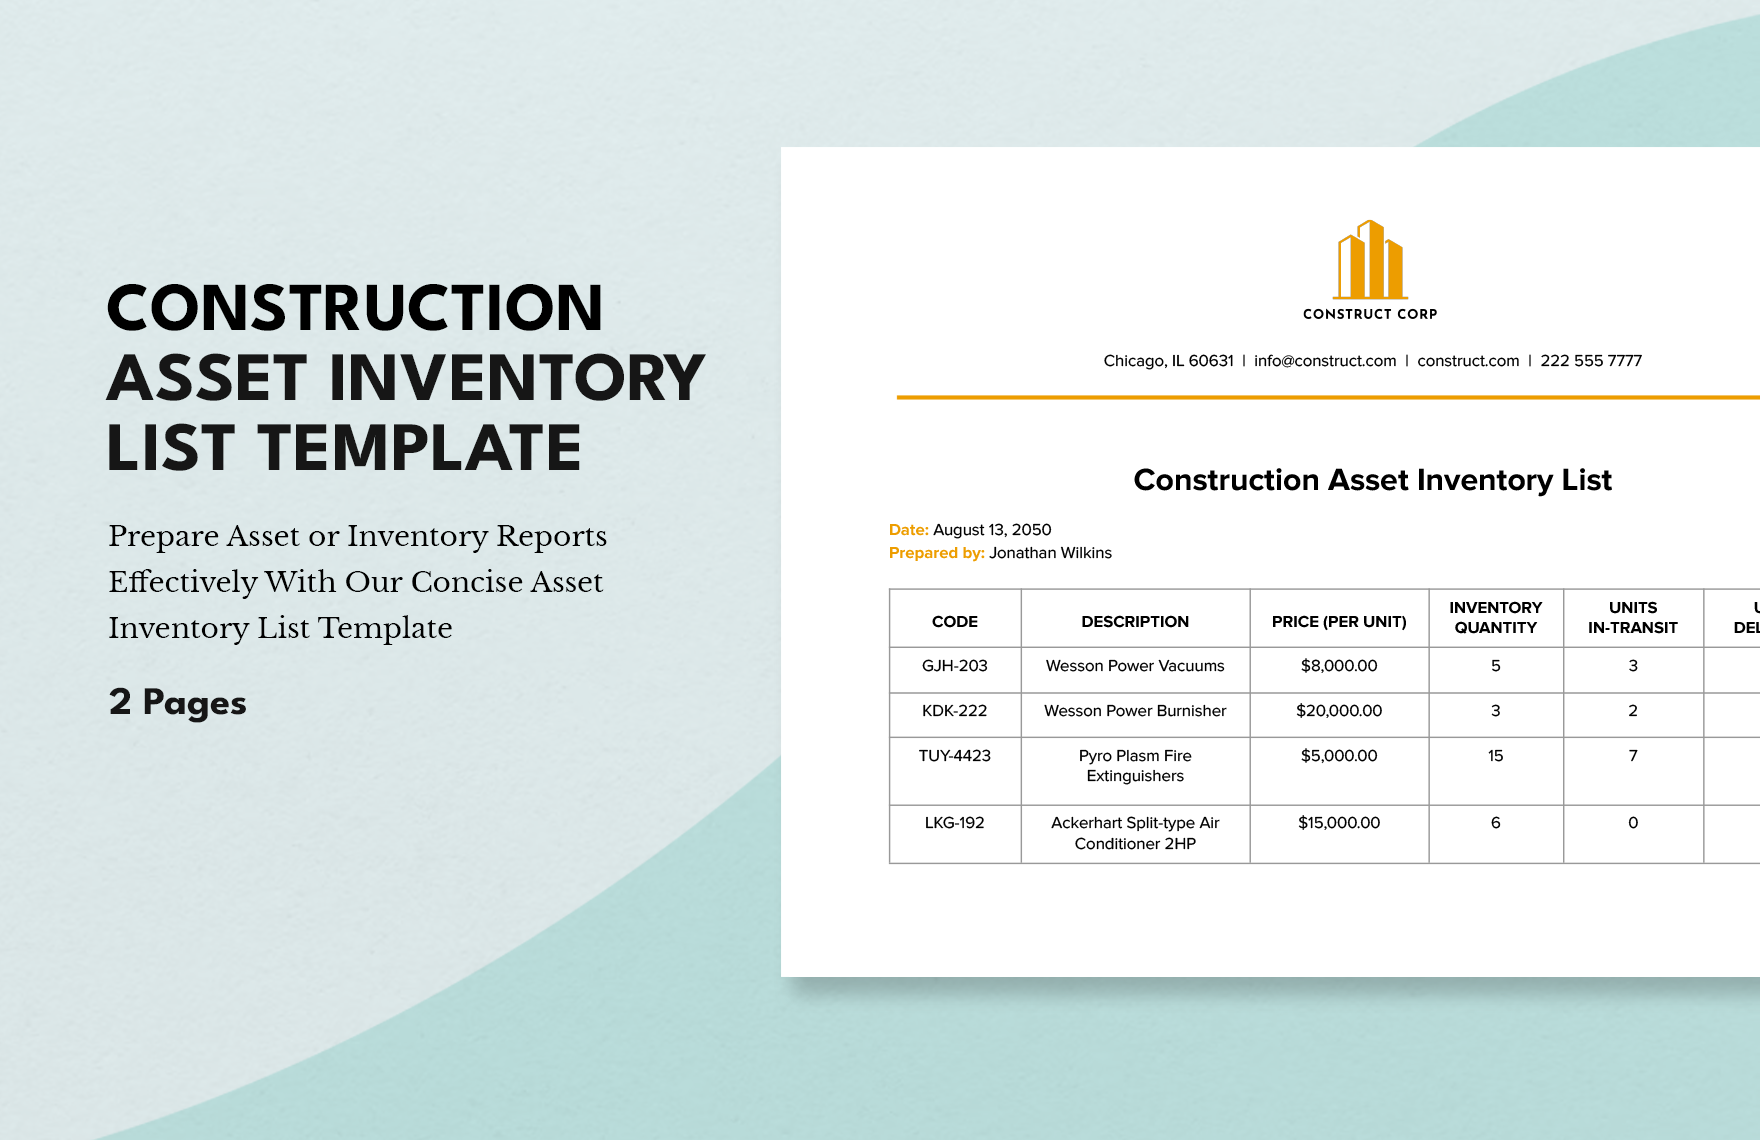 Construction Asset Inventory List Template in Word, Google Docs